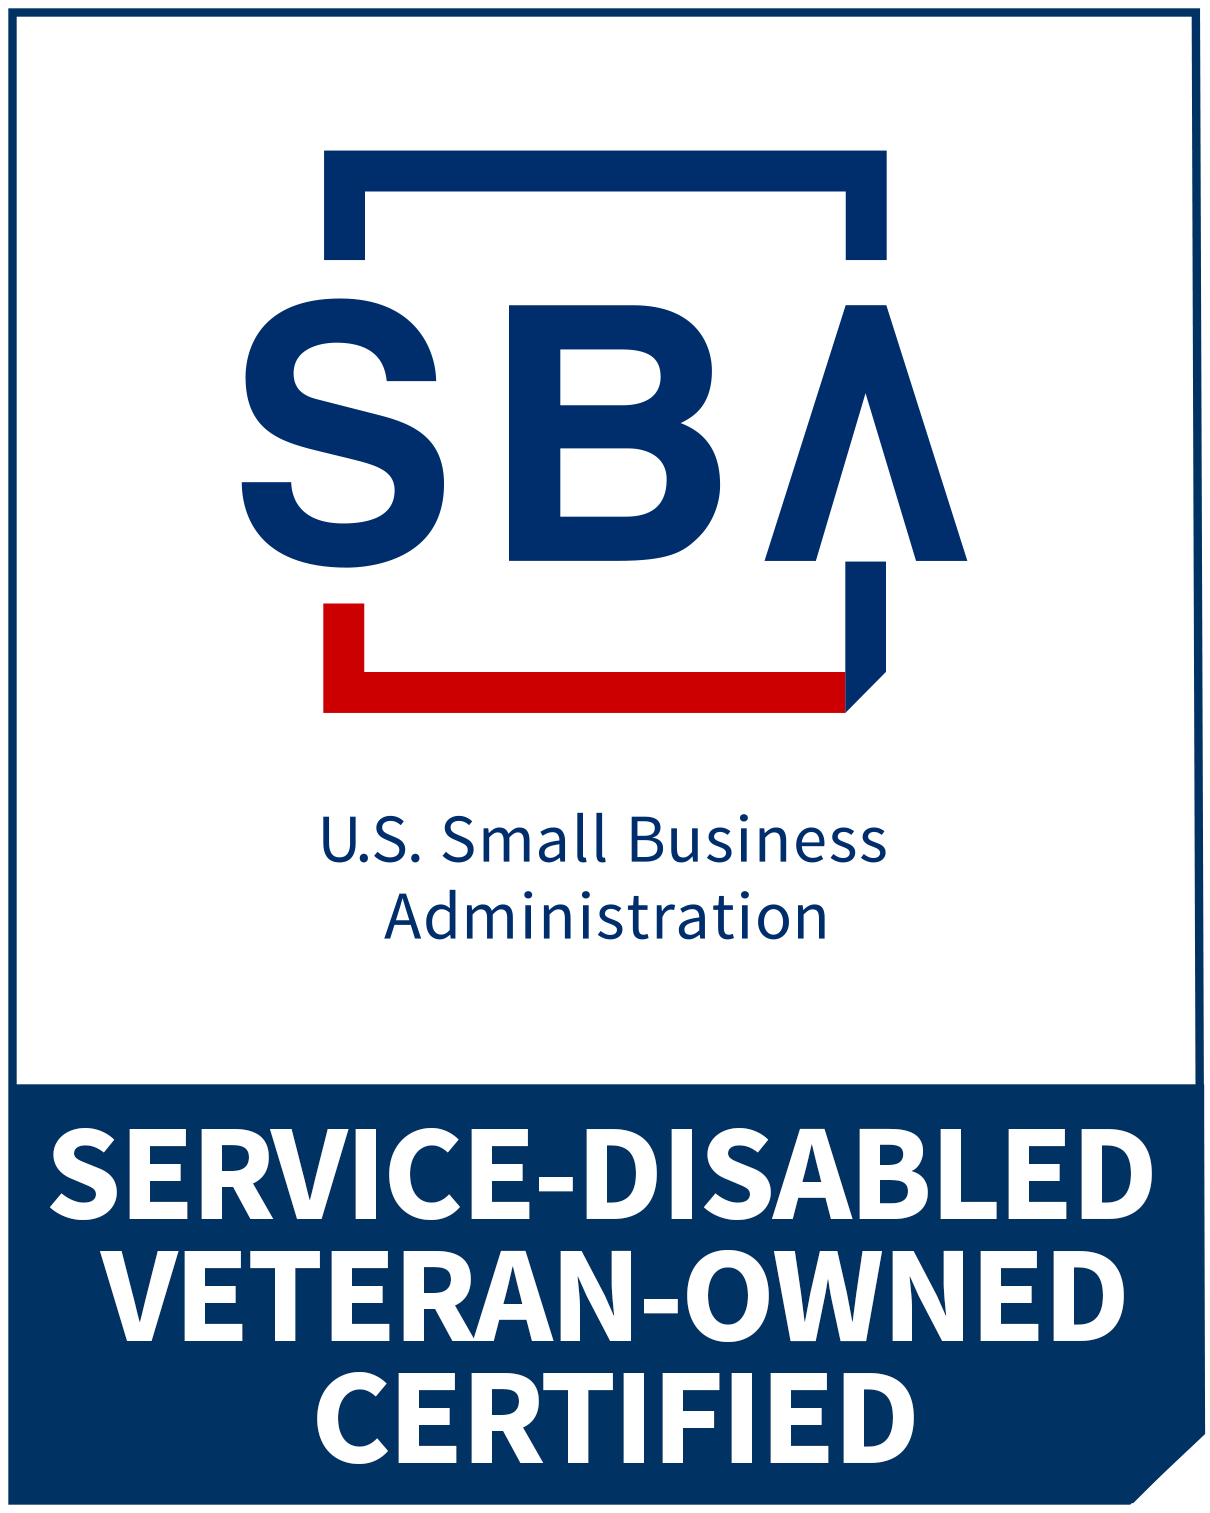 Service Disabled Veteran-Owned Certified